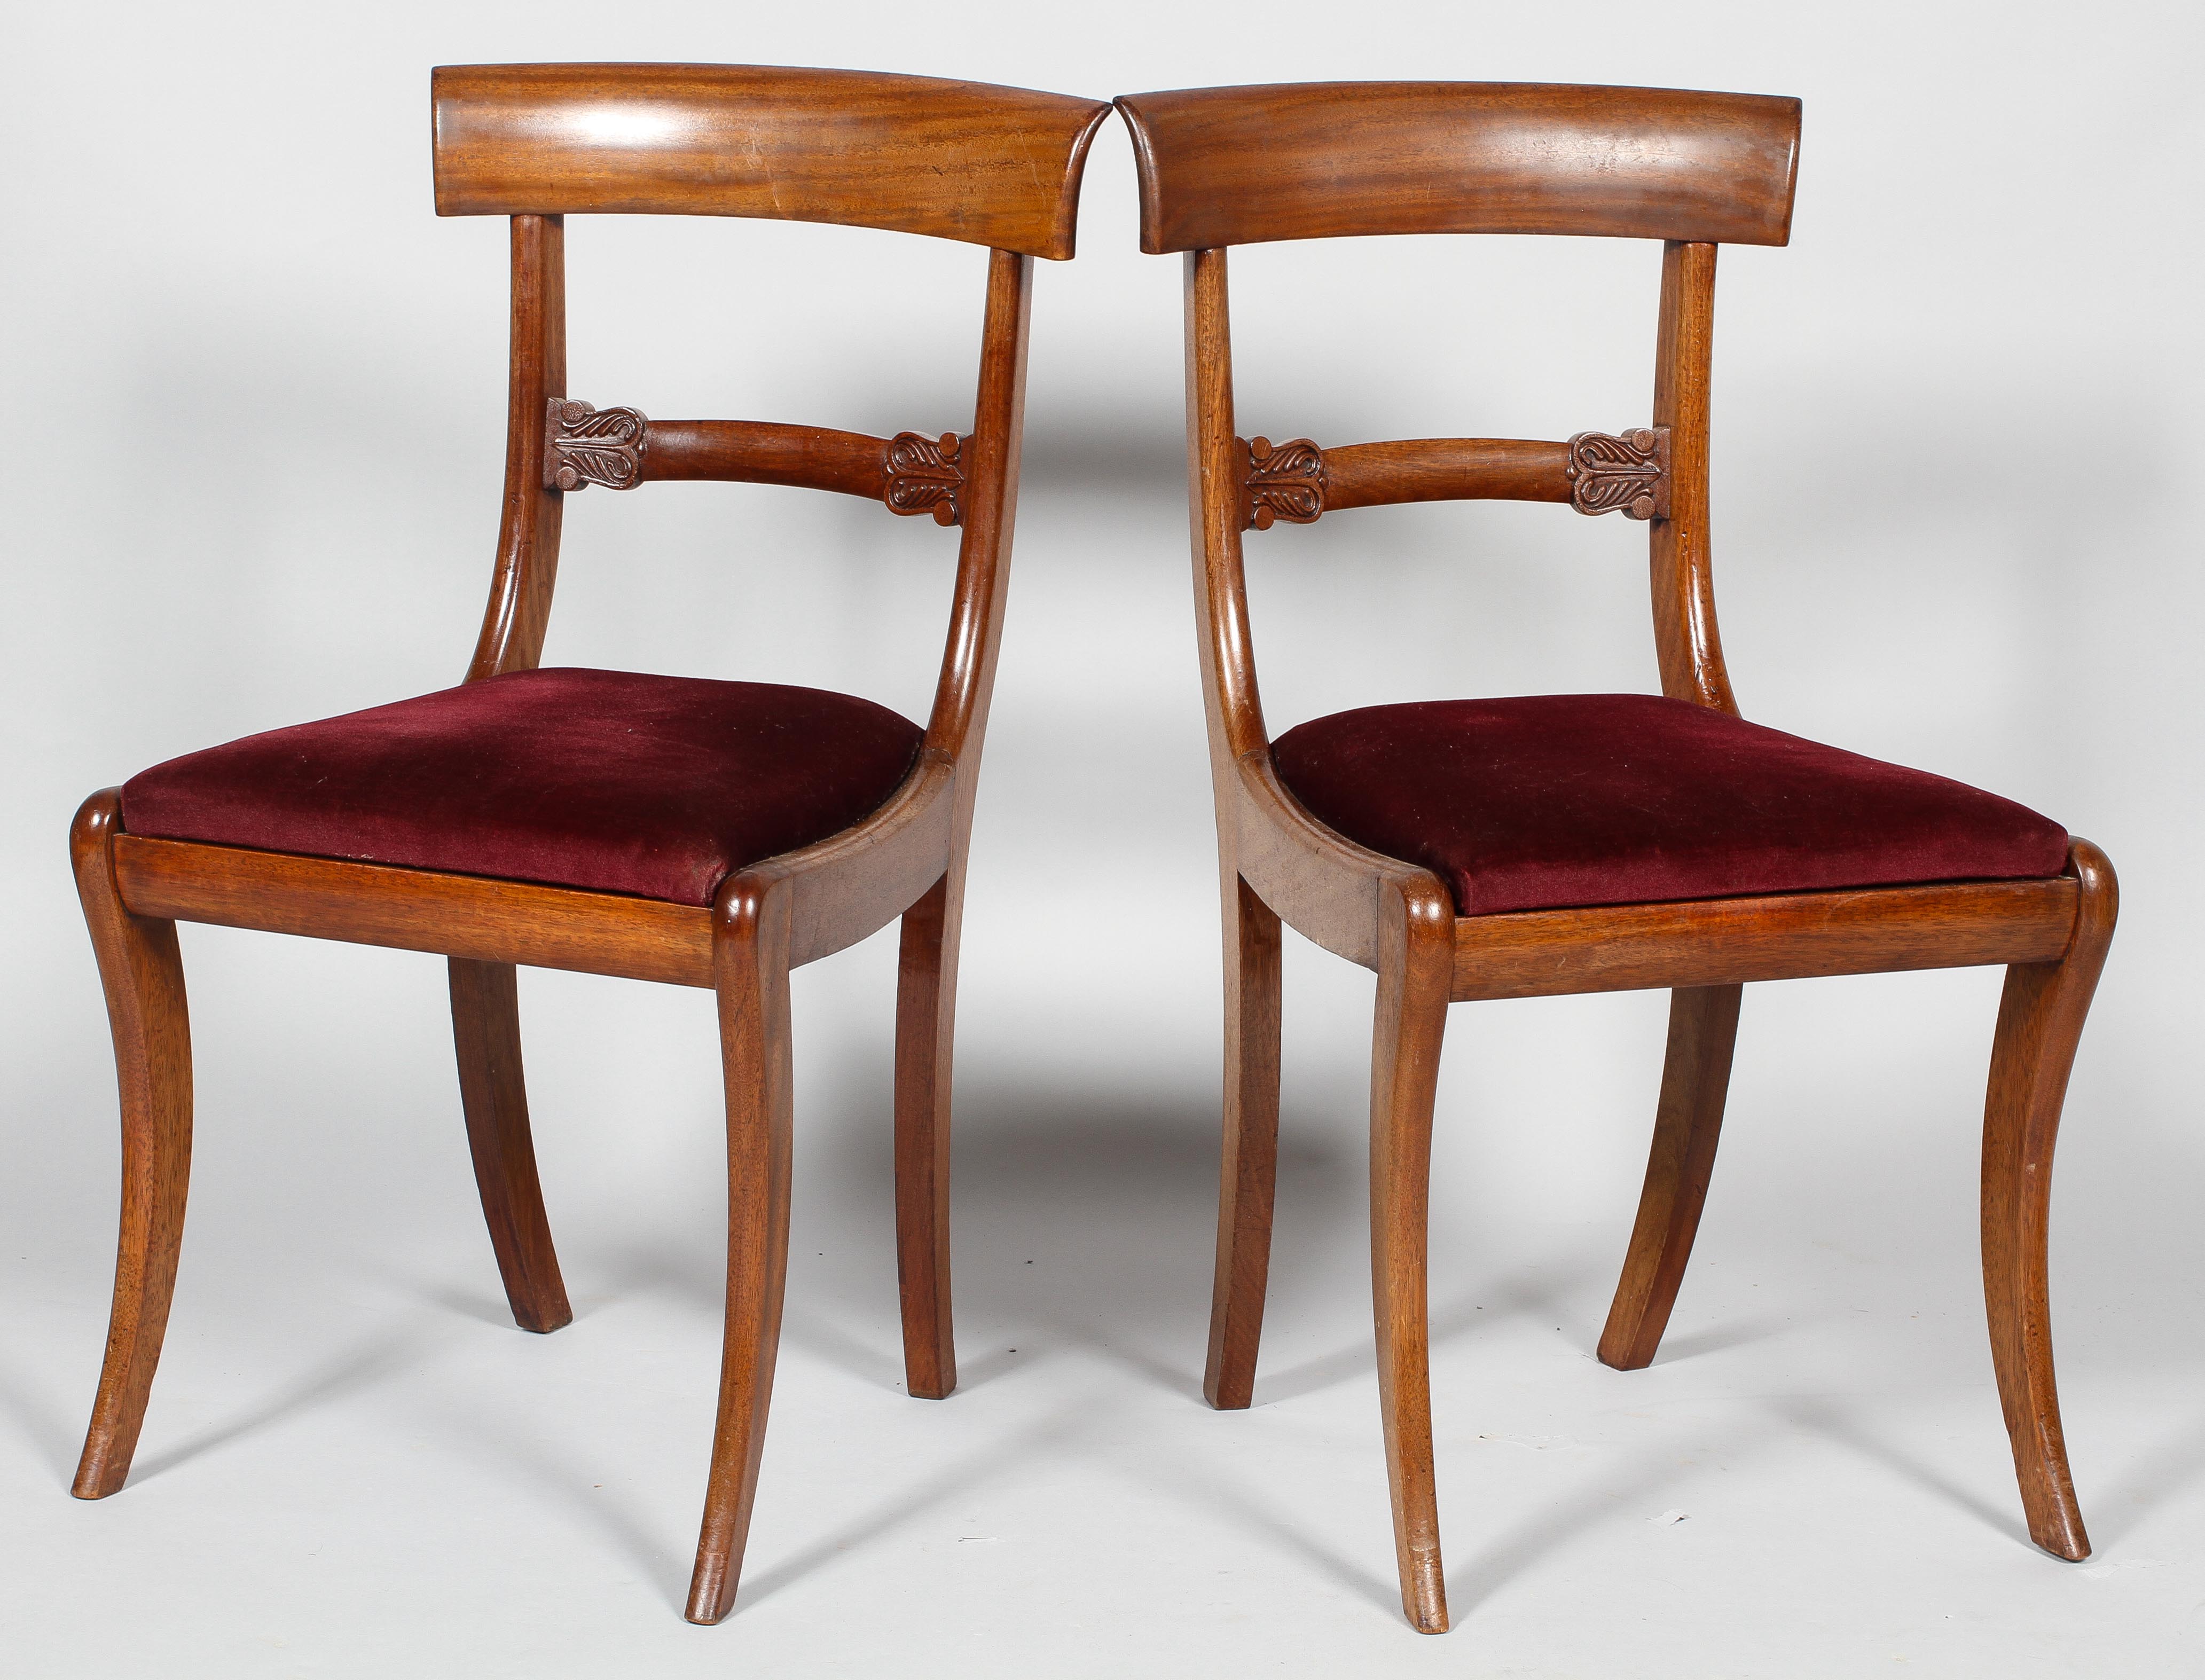 A pair of William IV mahogany dining chairs, with carved 'Trafalgar' top rail,